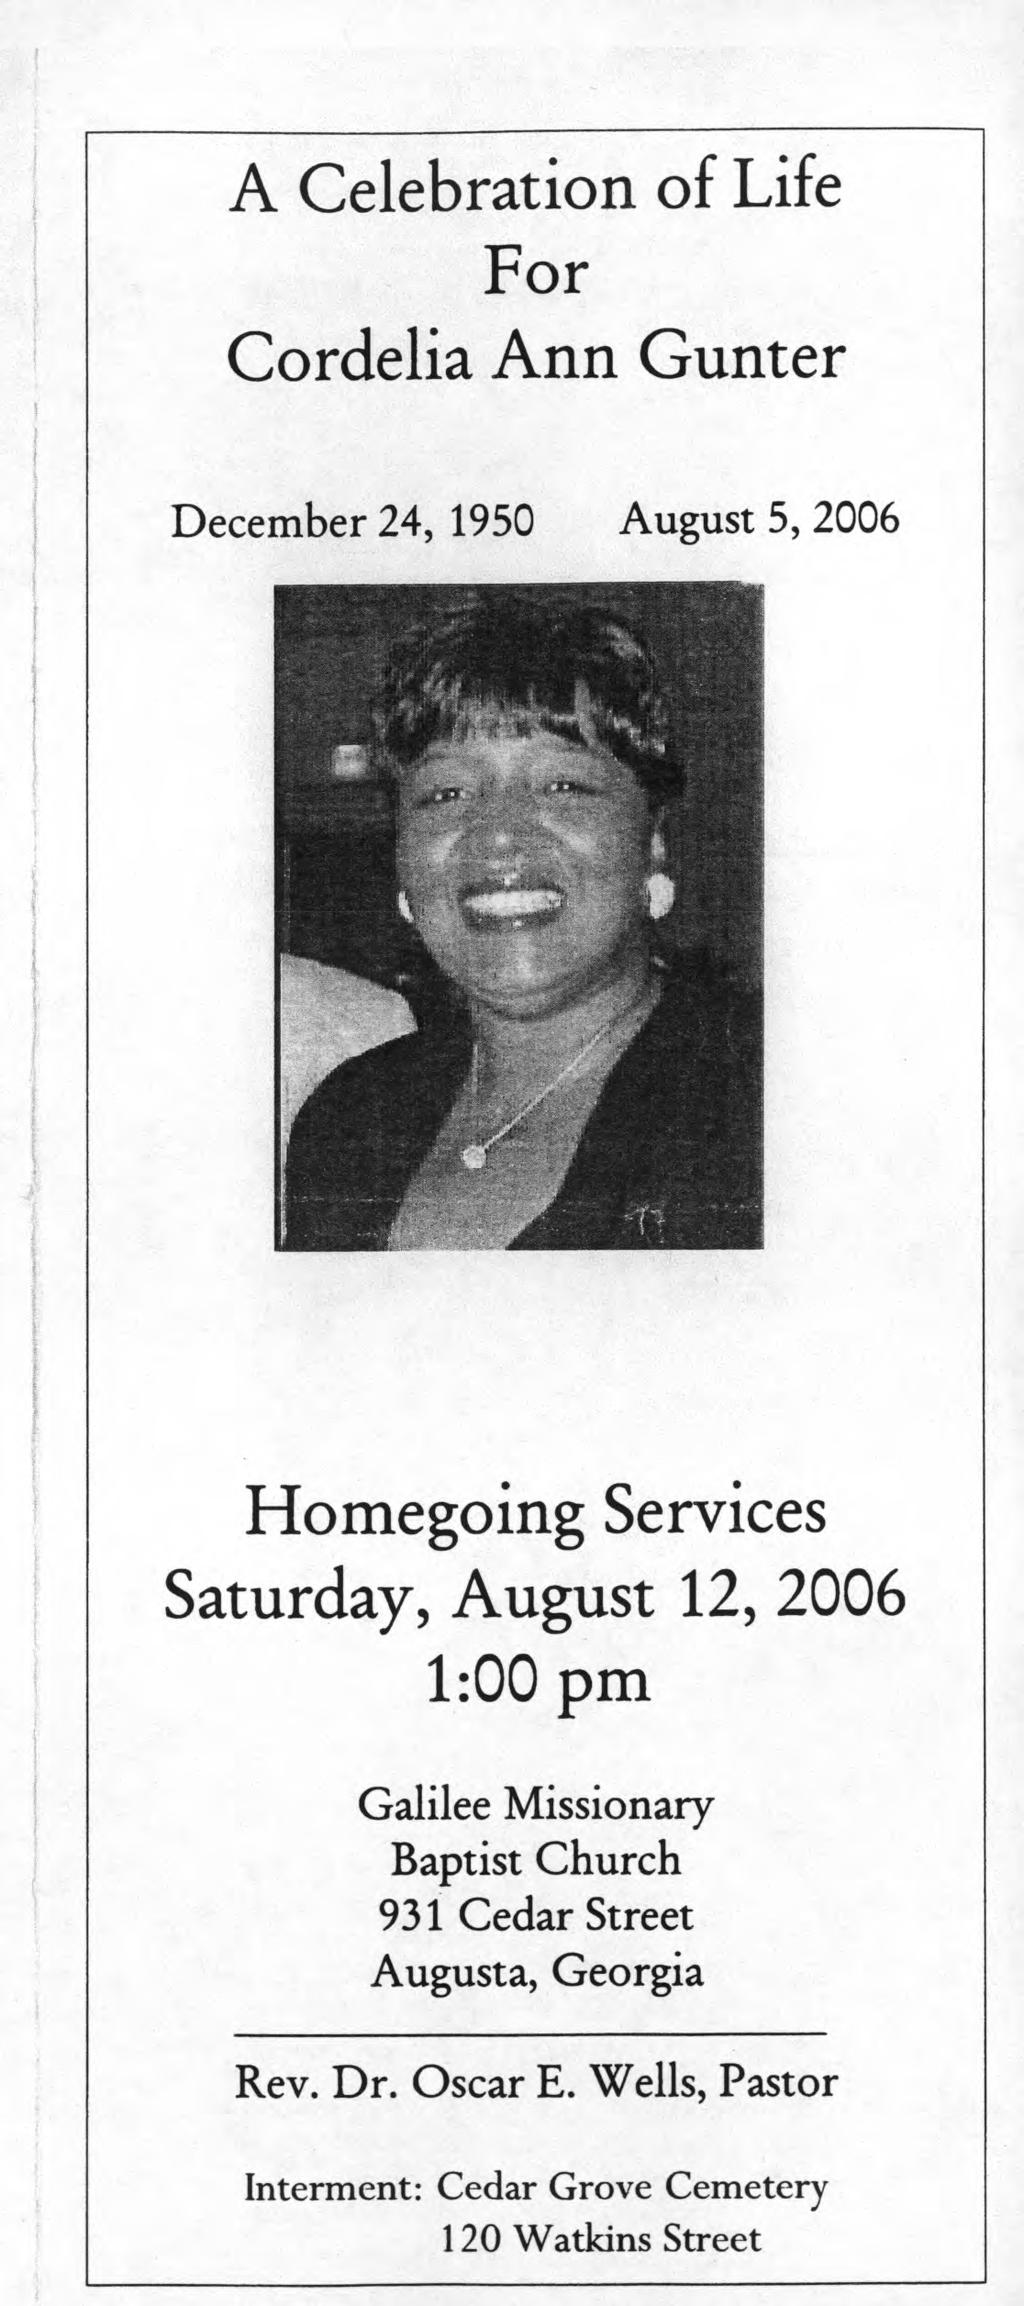 A Celebration of Life For Cordelia Ann Gunter December 24, 1950 August 5, 2006 Homegoing Services Saturday, August 12, 2006 1:00 pm Galilee